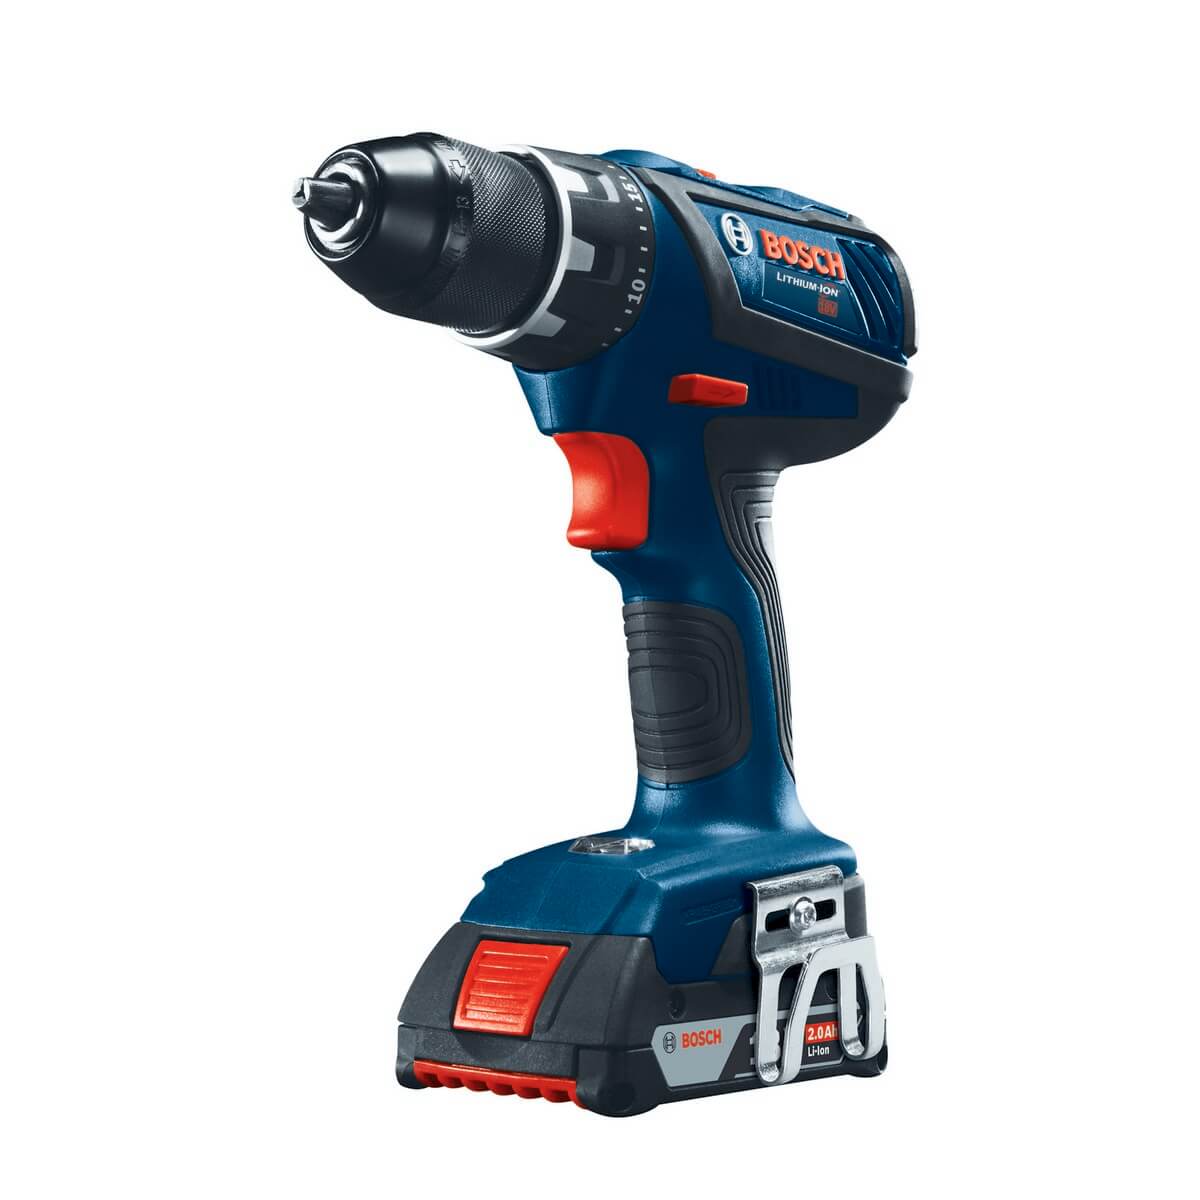 Bosch DDS181A-02 18V Compact Tough 1/2" Drill/Driver Kit with SlimPack Batteries - wise-line-tools